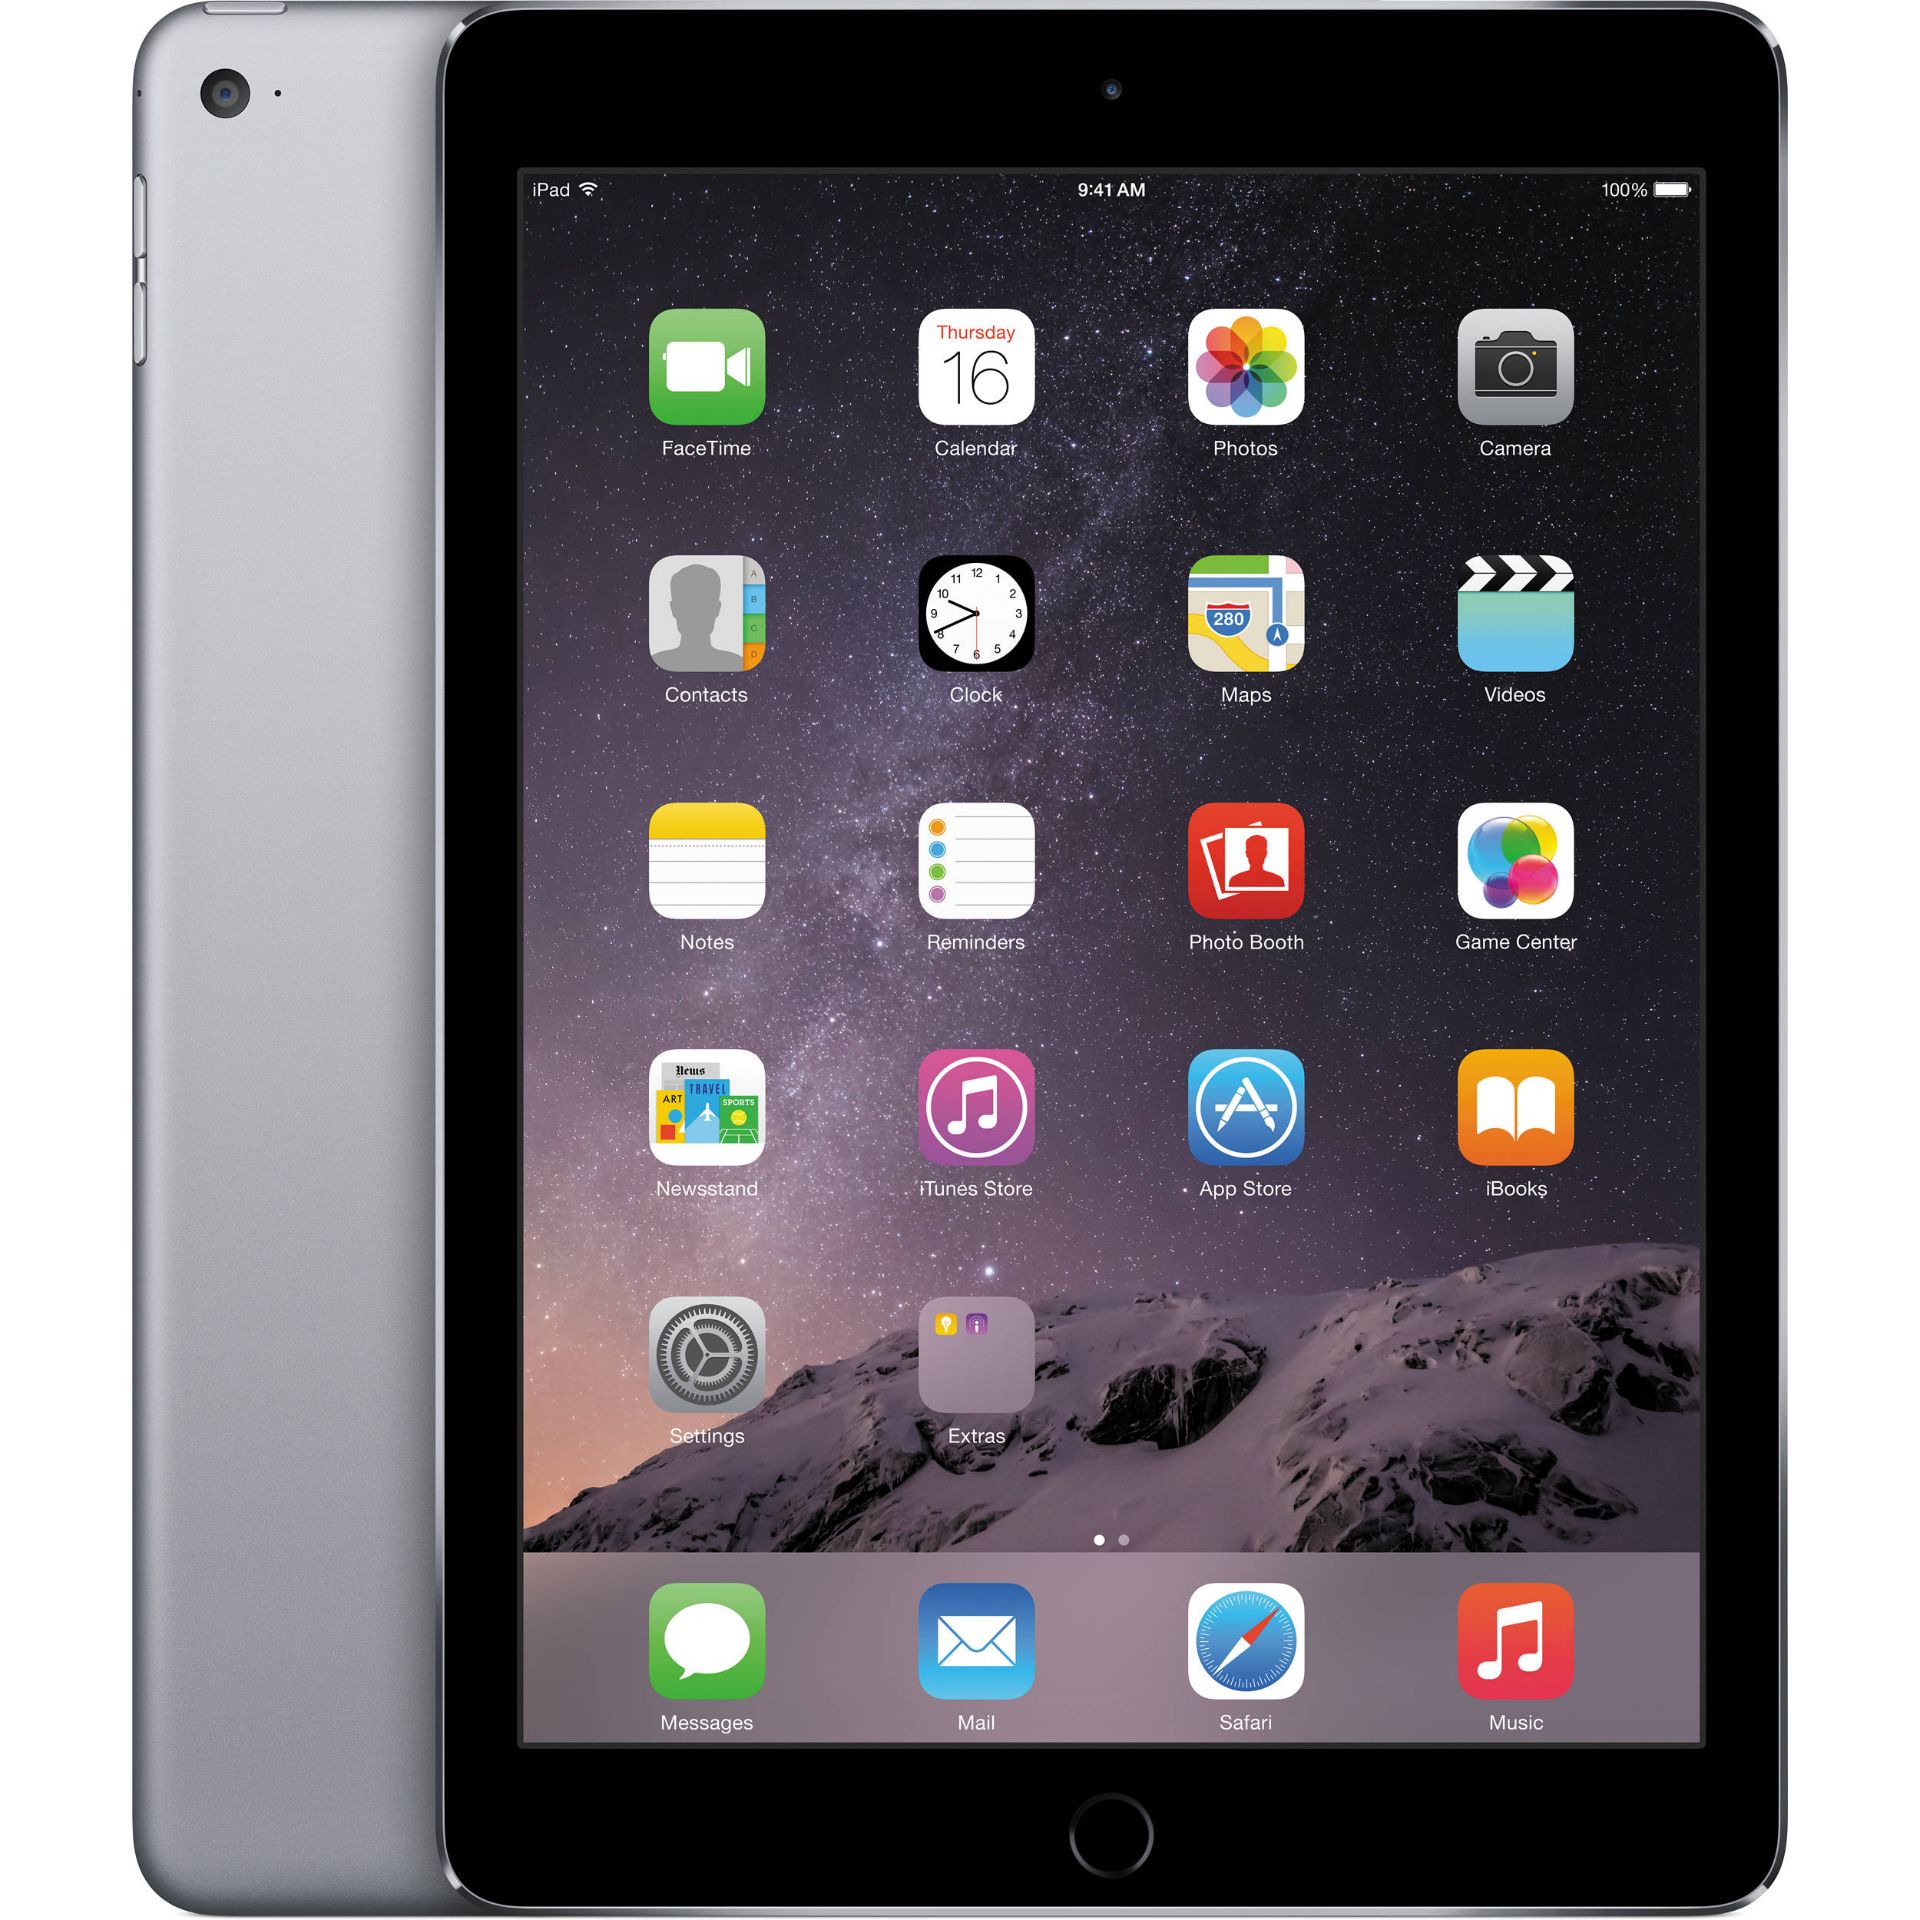 V Grade A Apple iPad Air 16Gb Space Grey X 2 YOUR BID PRICE TO BE MULTIPLIED BY TWO